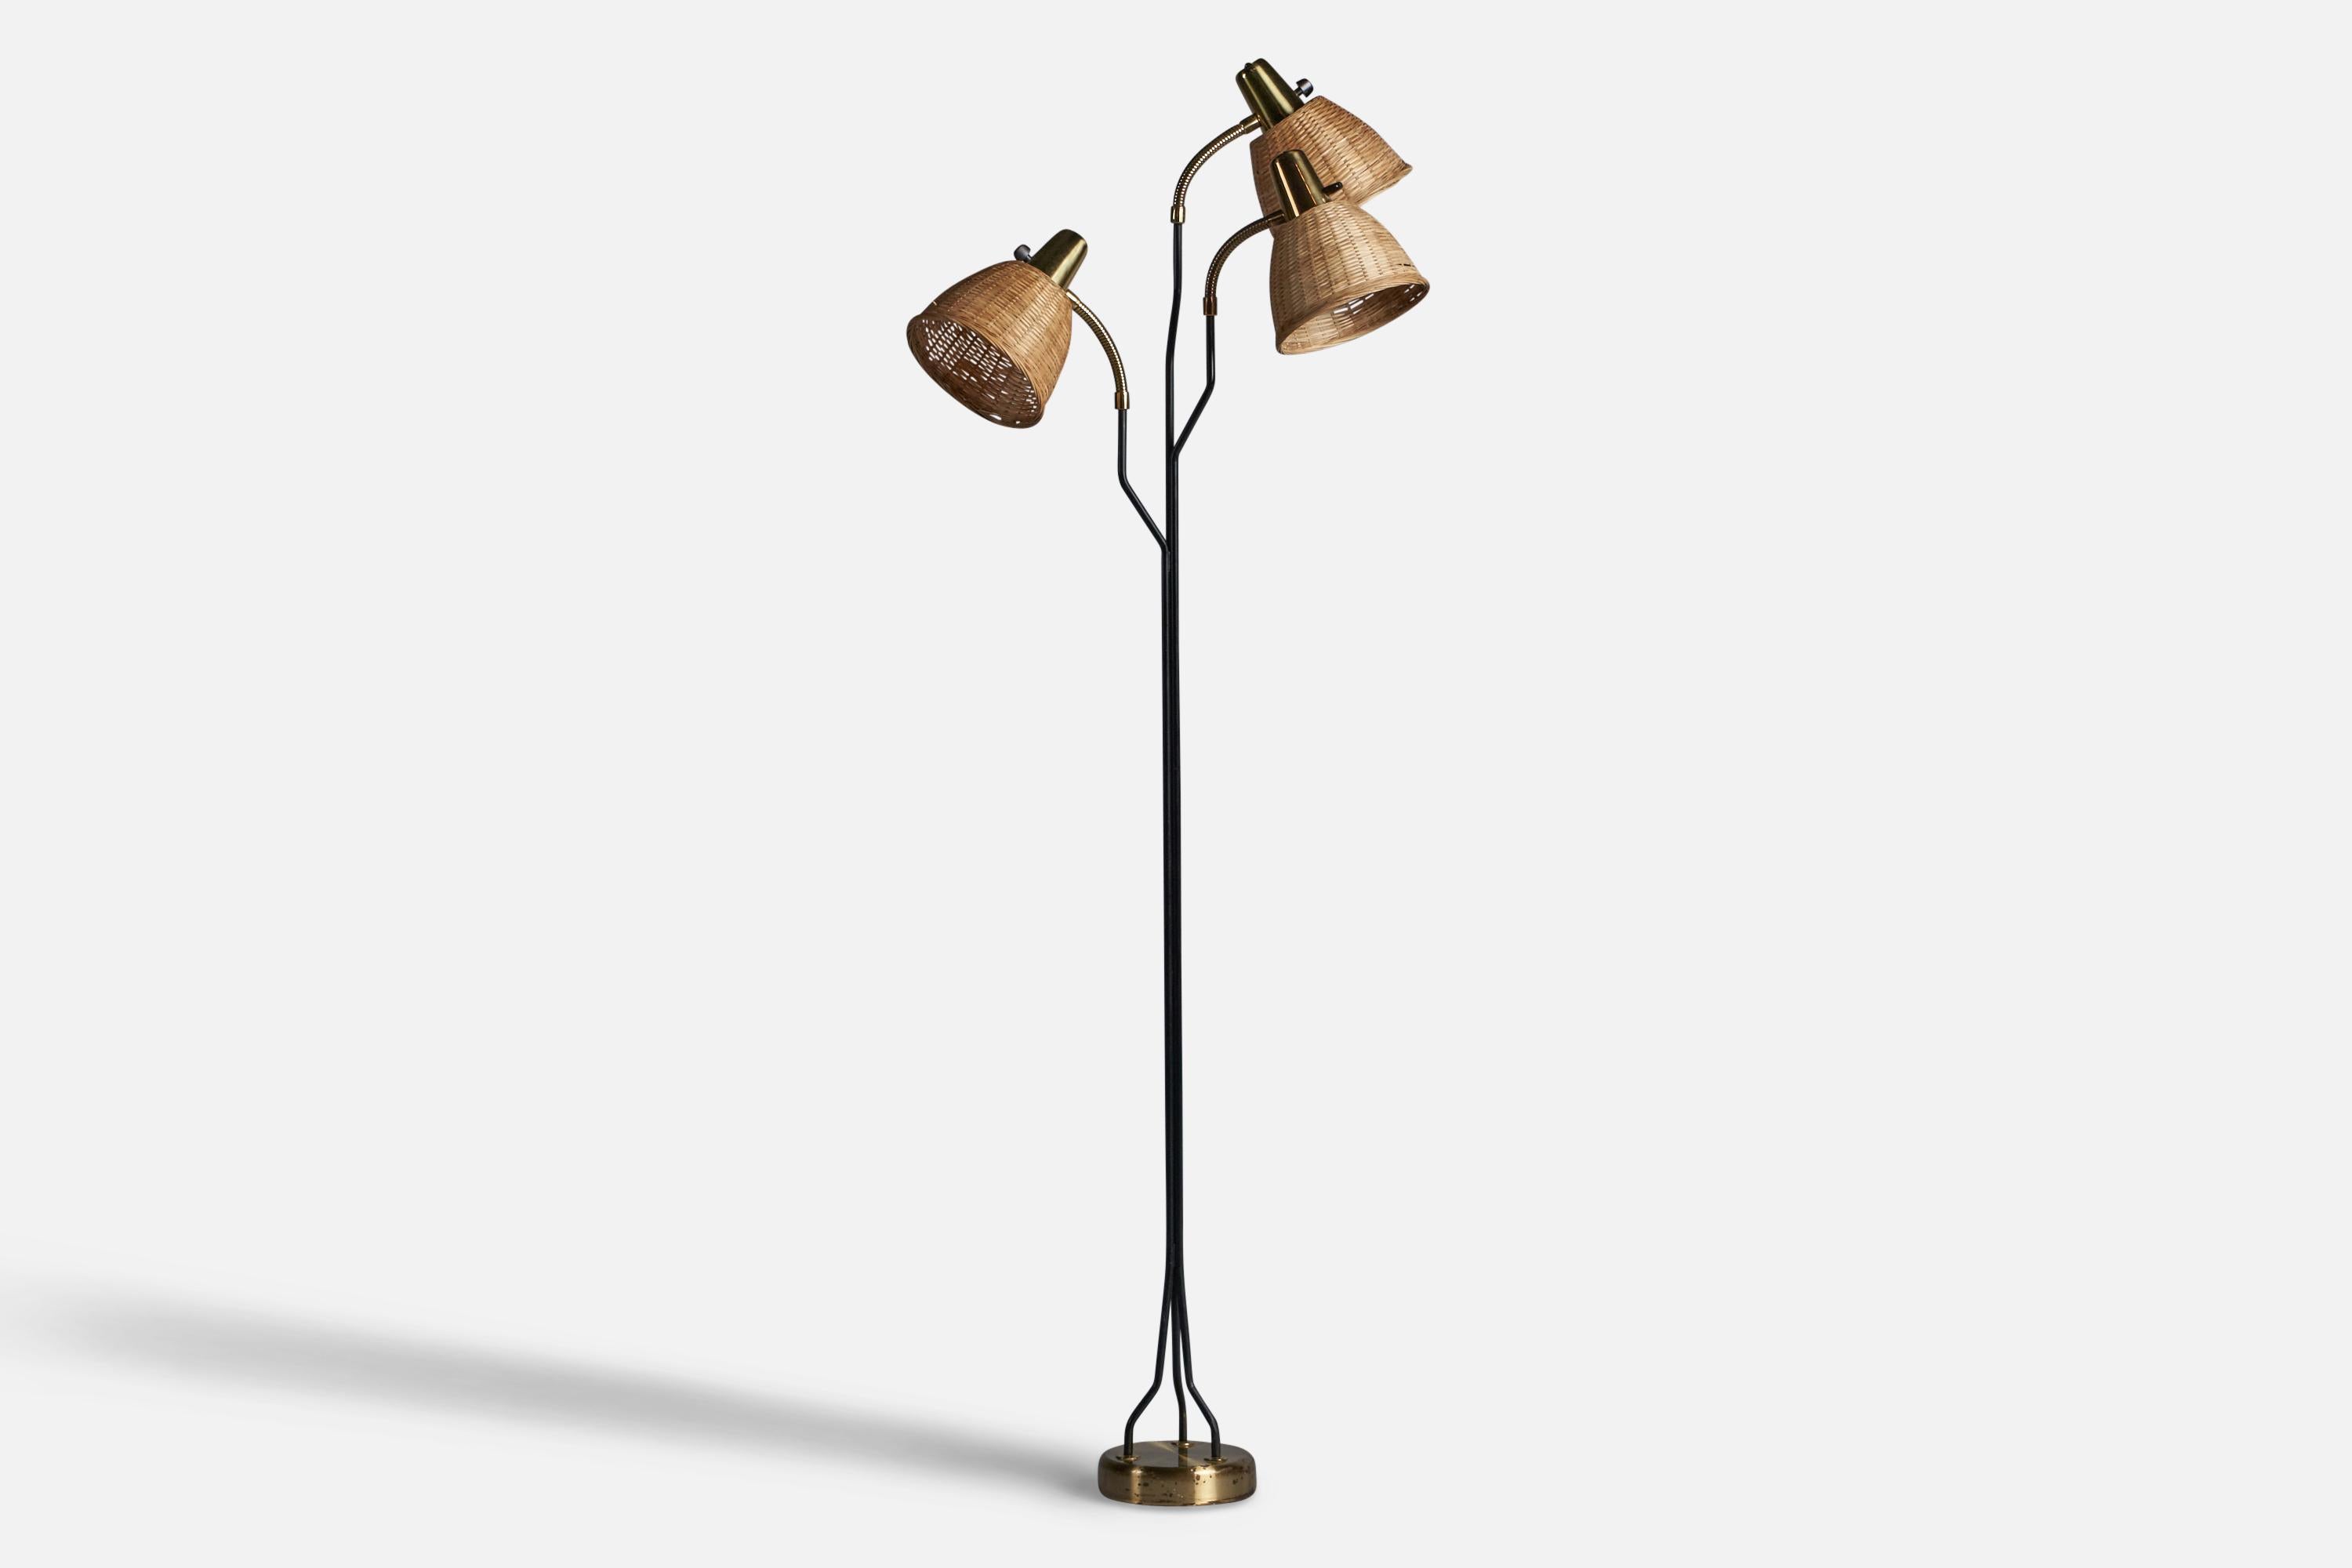 An adjustable three-armed brass, black-lacquered metal and rattan floor lamp, designed and produced by Eskilstuna Elektrofabrik Aktiebolag, Sweden, c. 1960s.

Overall Dimensions (inches): 63” H x 17” W x 14” D
Bulb Specifications: E-26 Bulb
Number